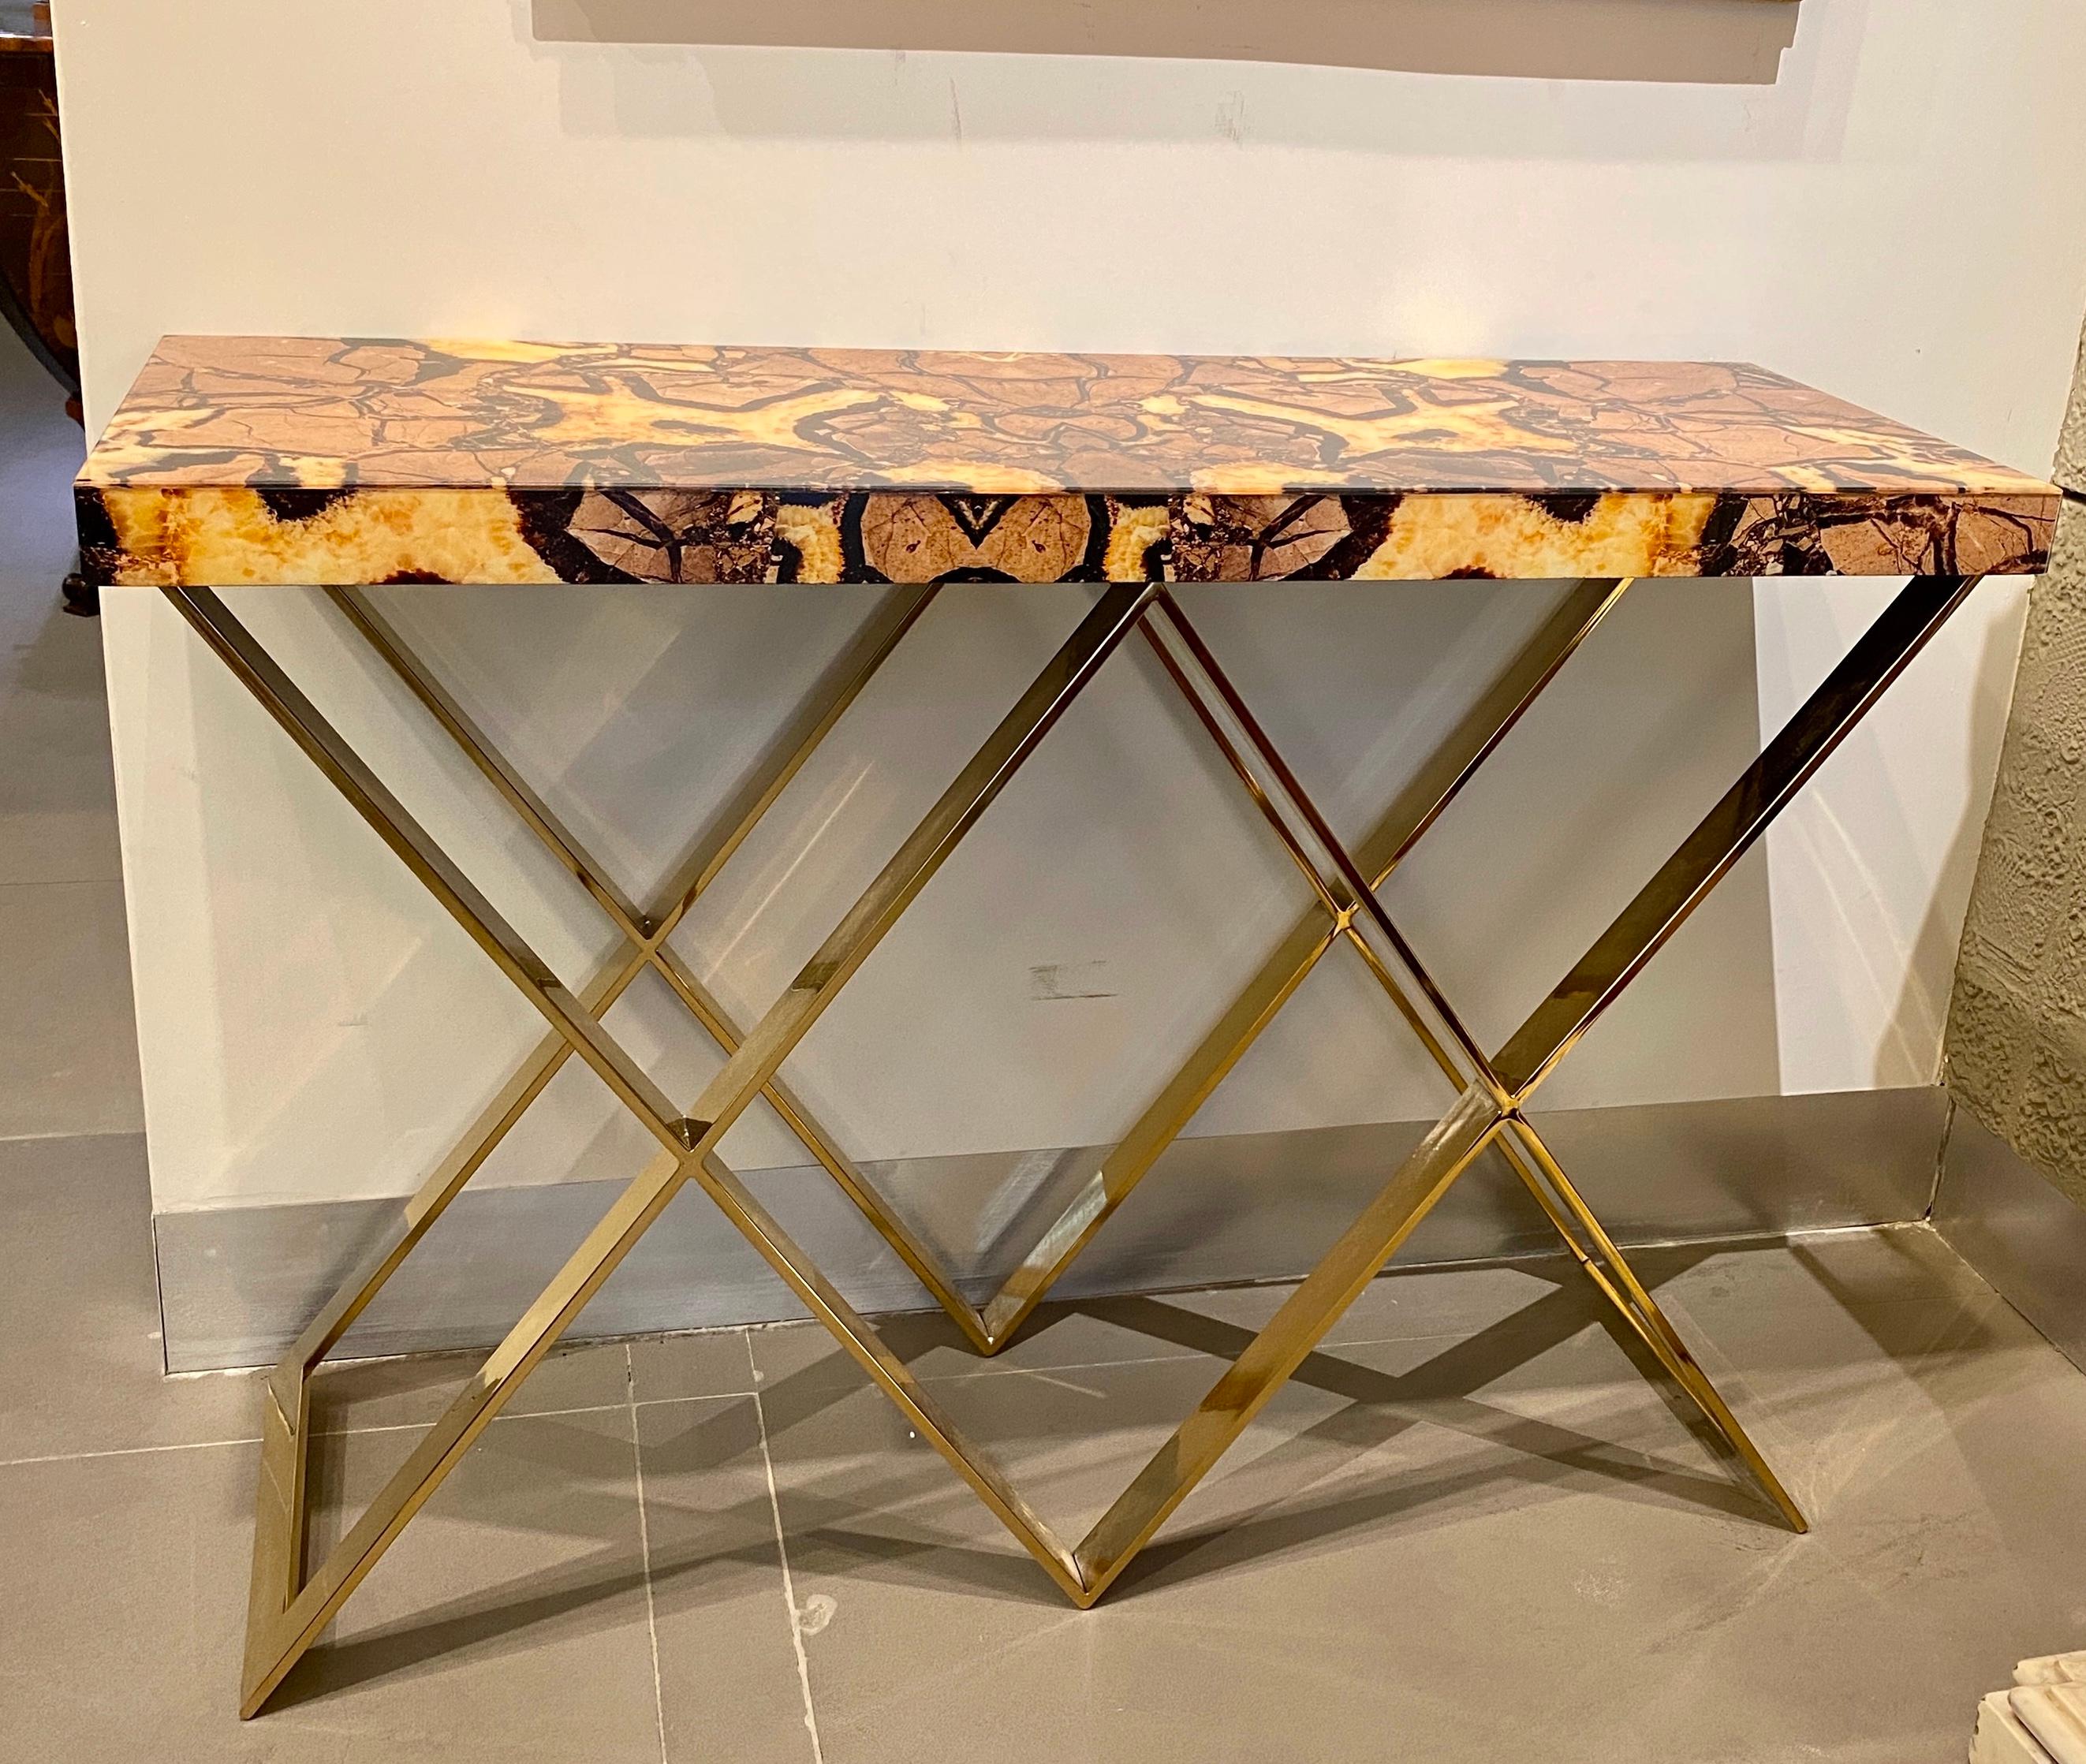 Exceptional console Table with double X-shaped brass base .
The glass tops of these pair of consoles are made with the imitation of a semi-precious stone called “septaria”, which is formed by overlapping mineral deposits and is crossed by crystal